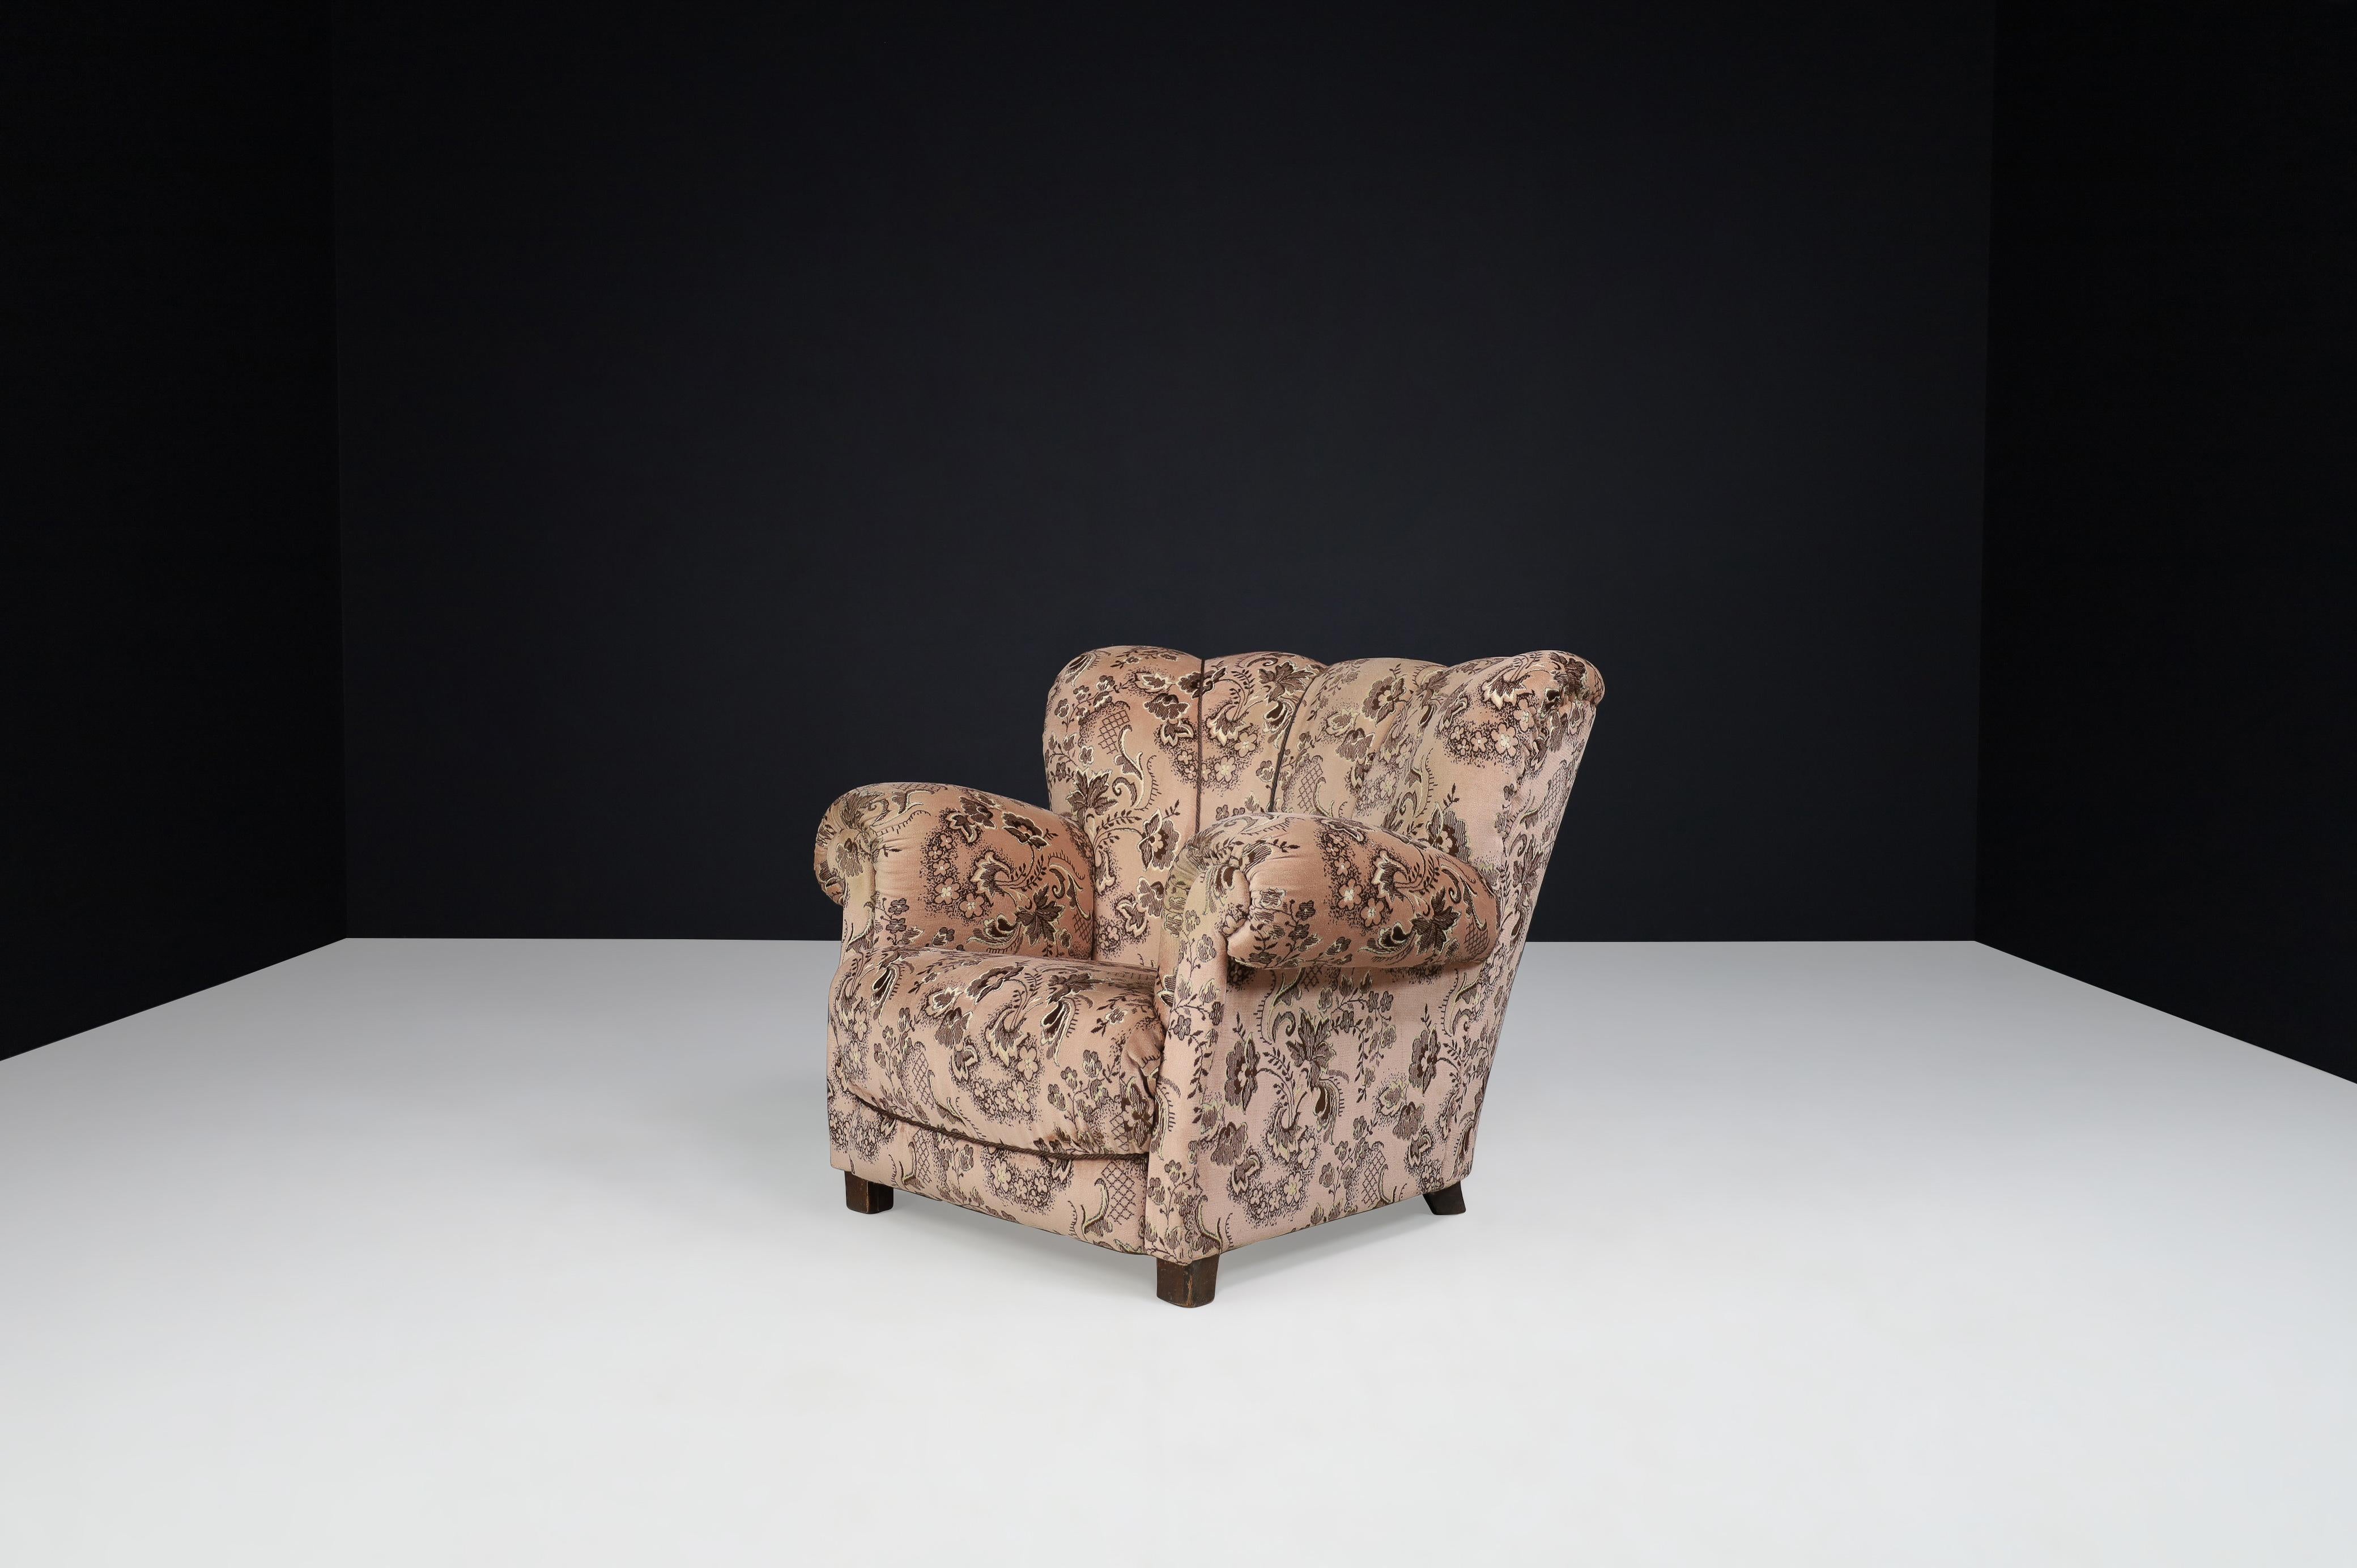 Czech Art Deco Lounge Chair in Floral Fabric Prague, 1930s For Sale